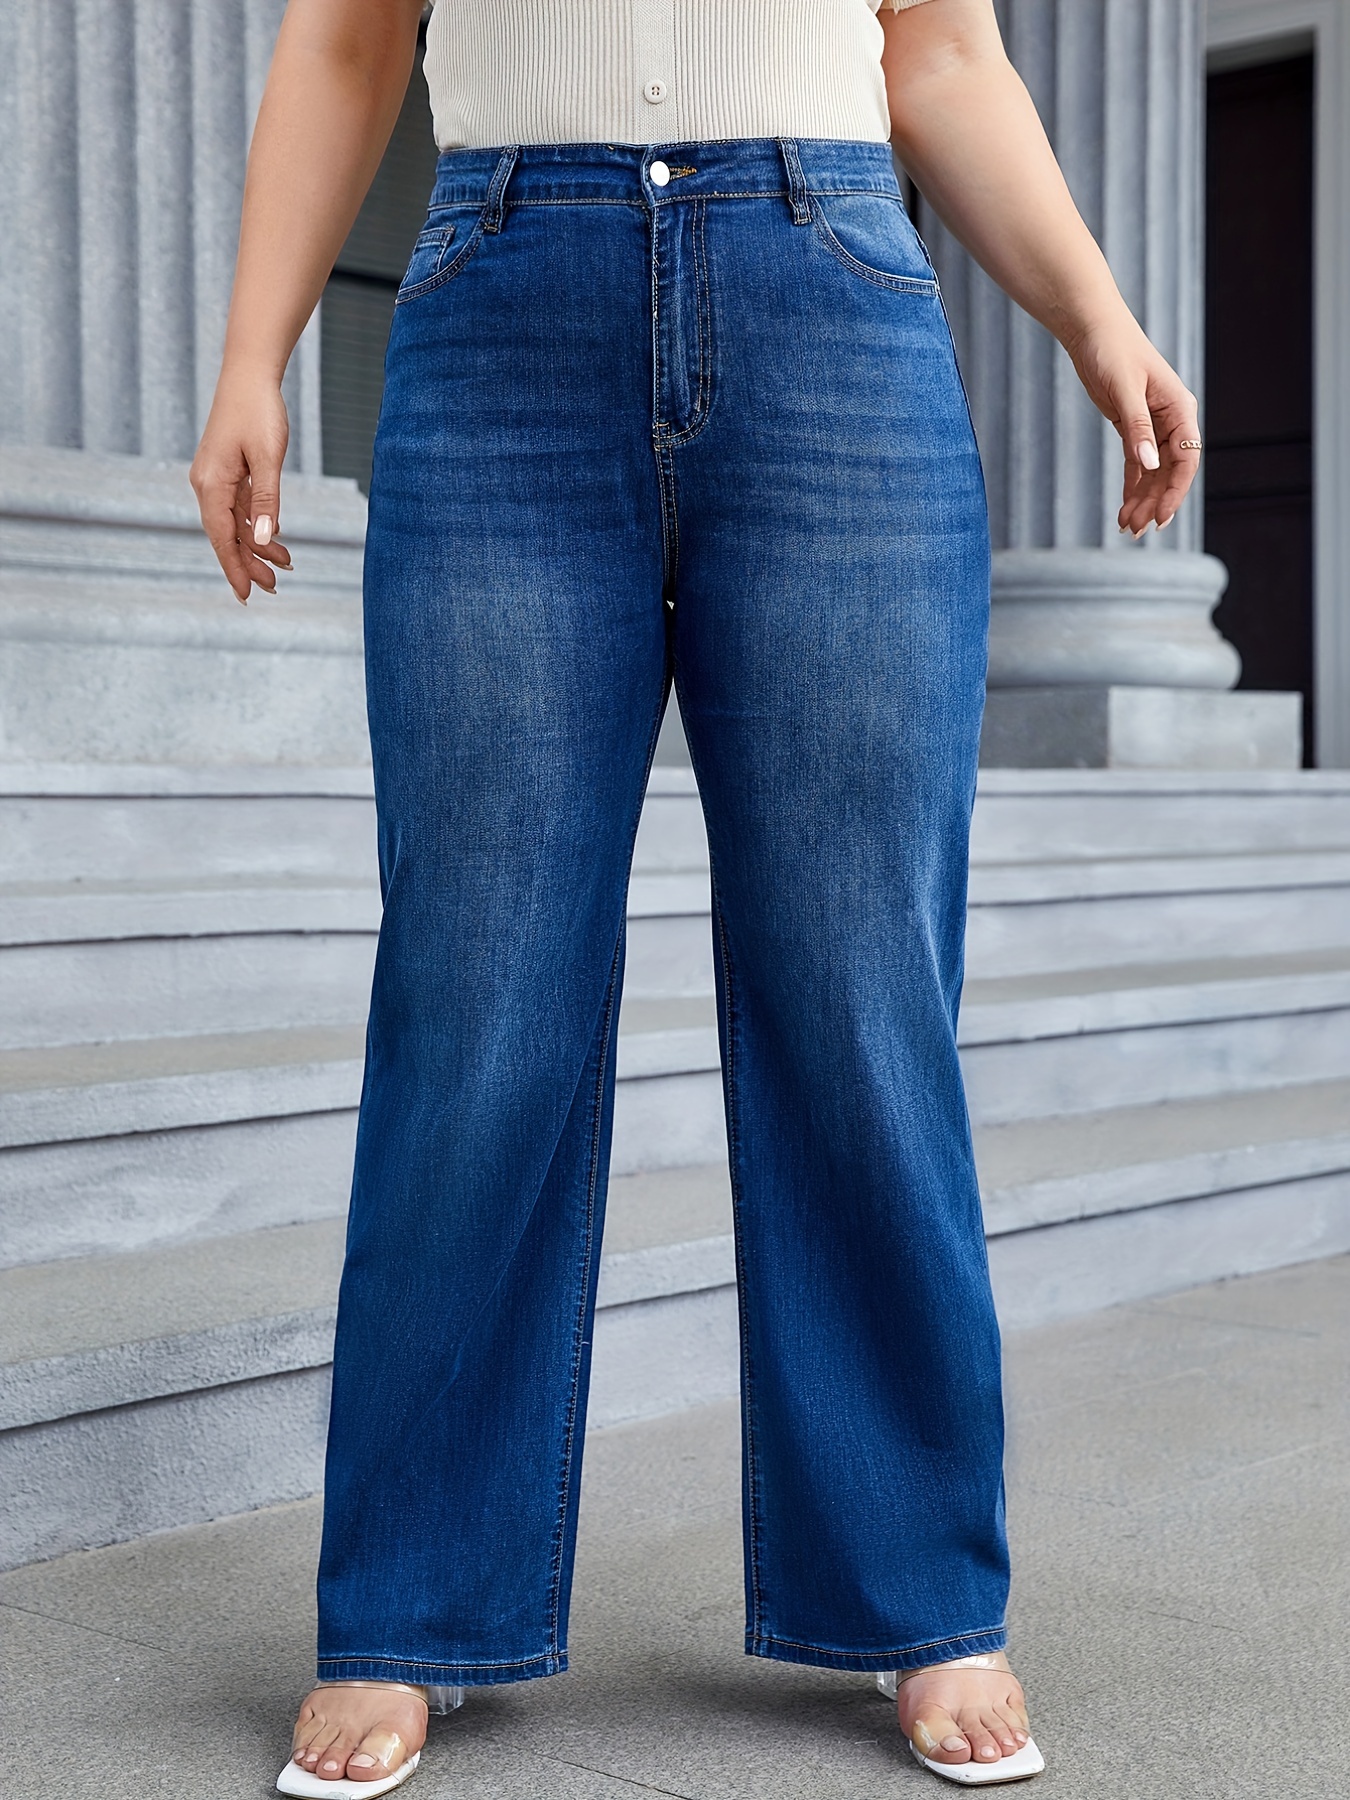 Plus Size Casual Jeans, Women's Plus Solid Button Fly Medium Stretch  Straight Leg Jeans